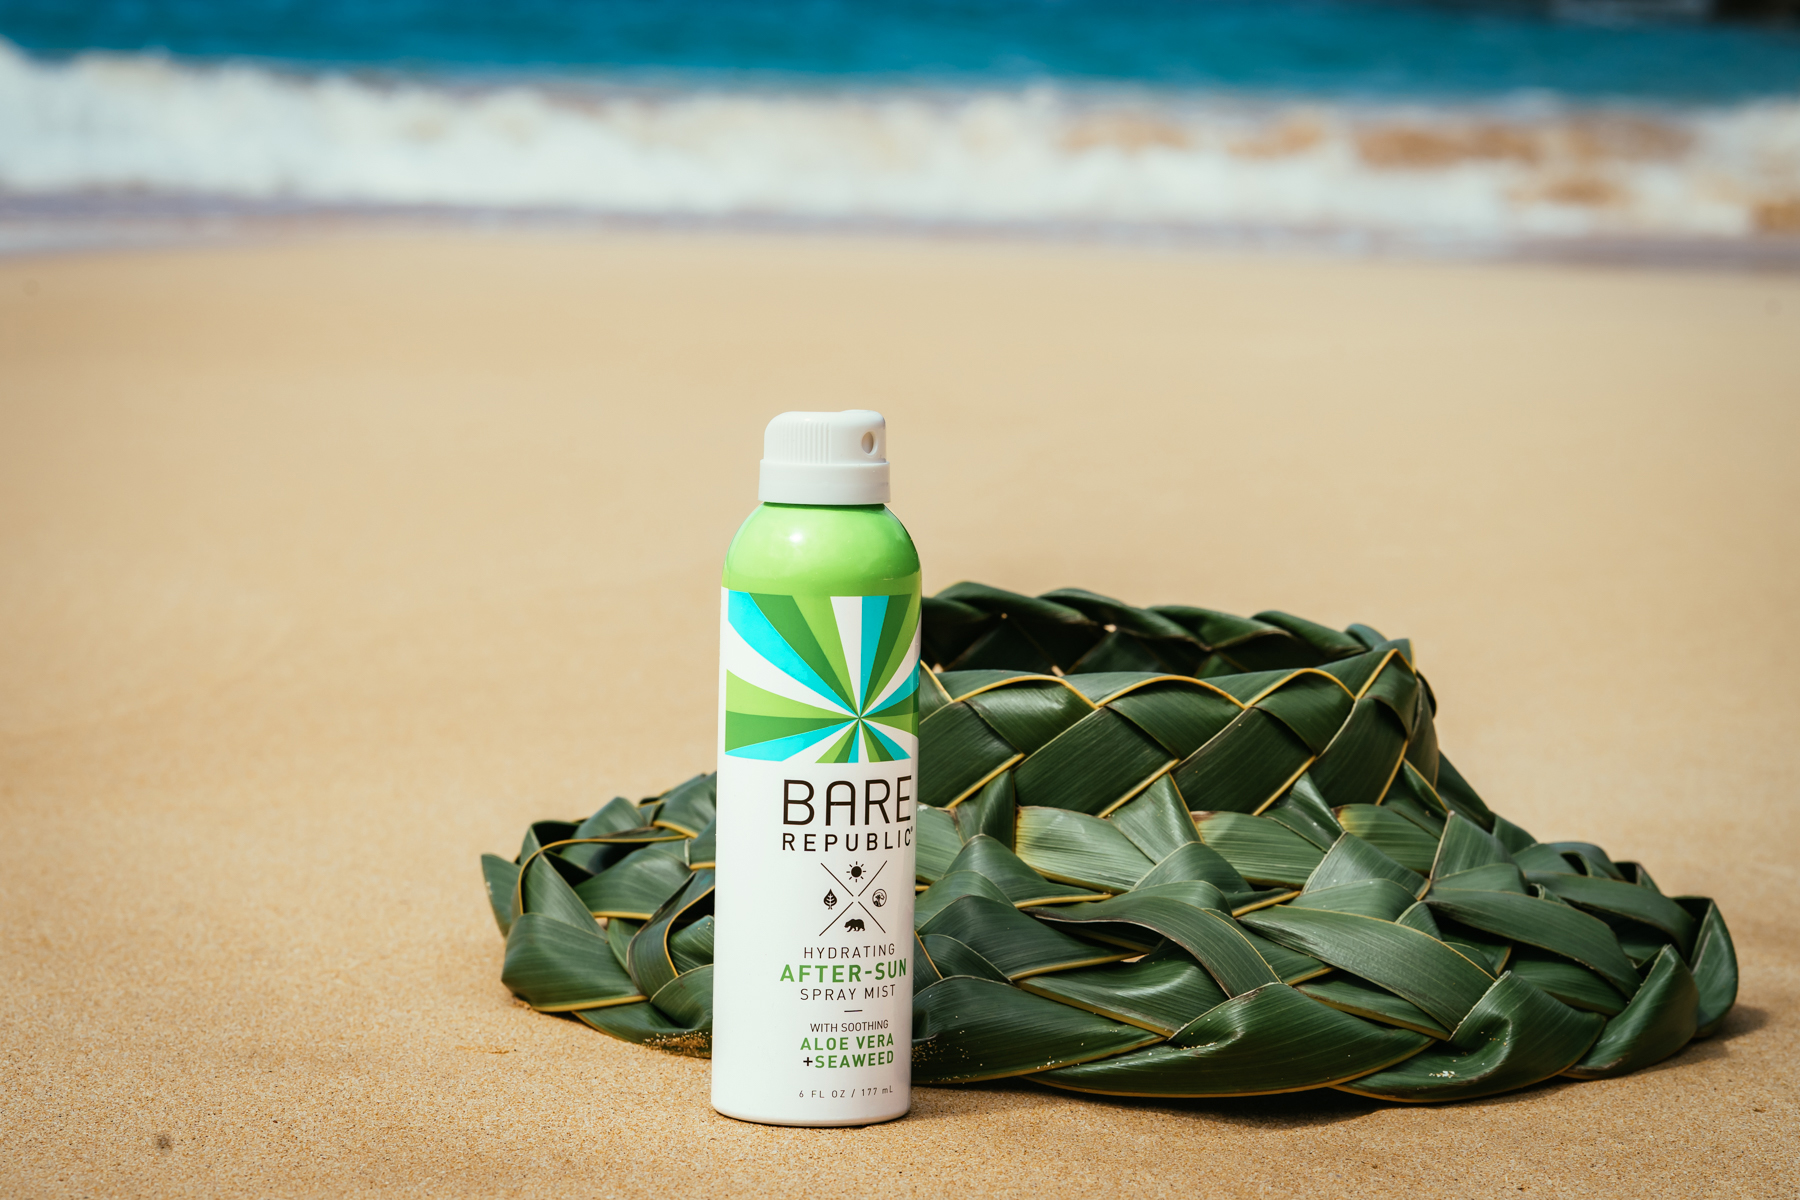 Bare Republic Hydrating After Sun Body Spray, Includes Aloe Vera and Seaweed, 6 fl oz - image 5 of 5